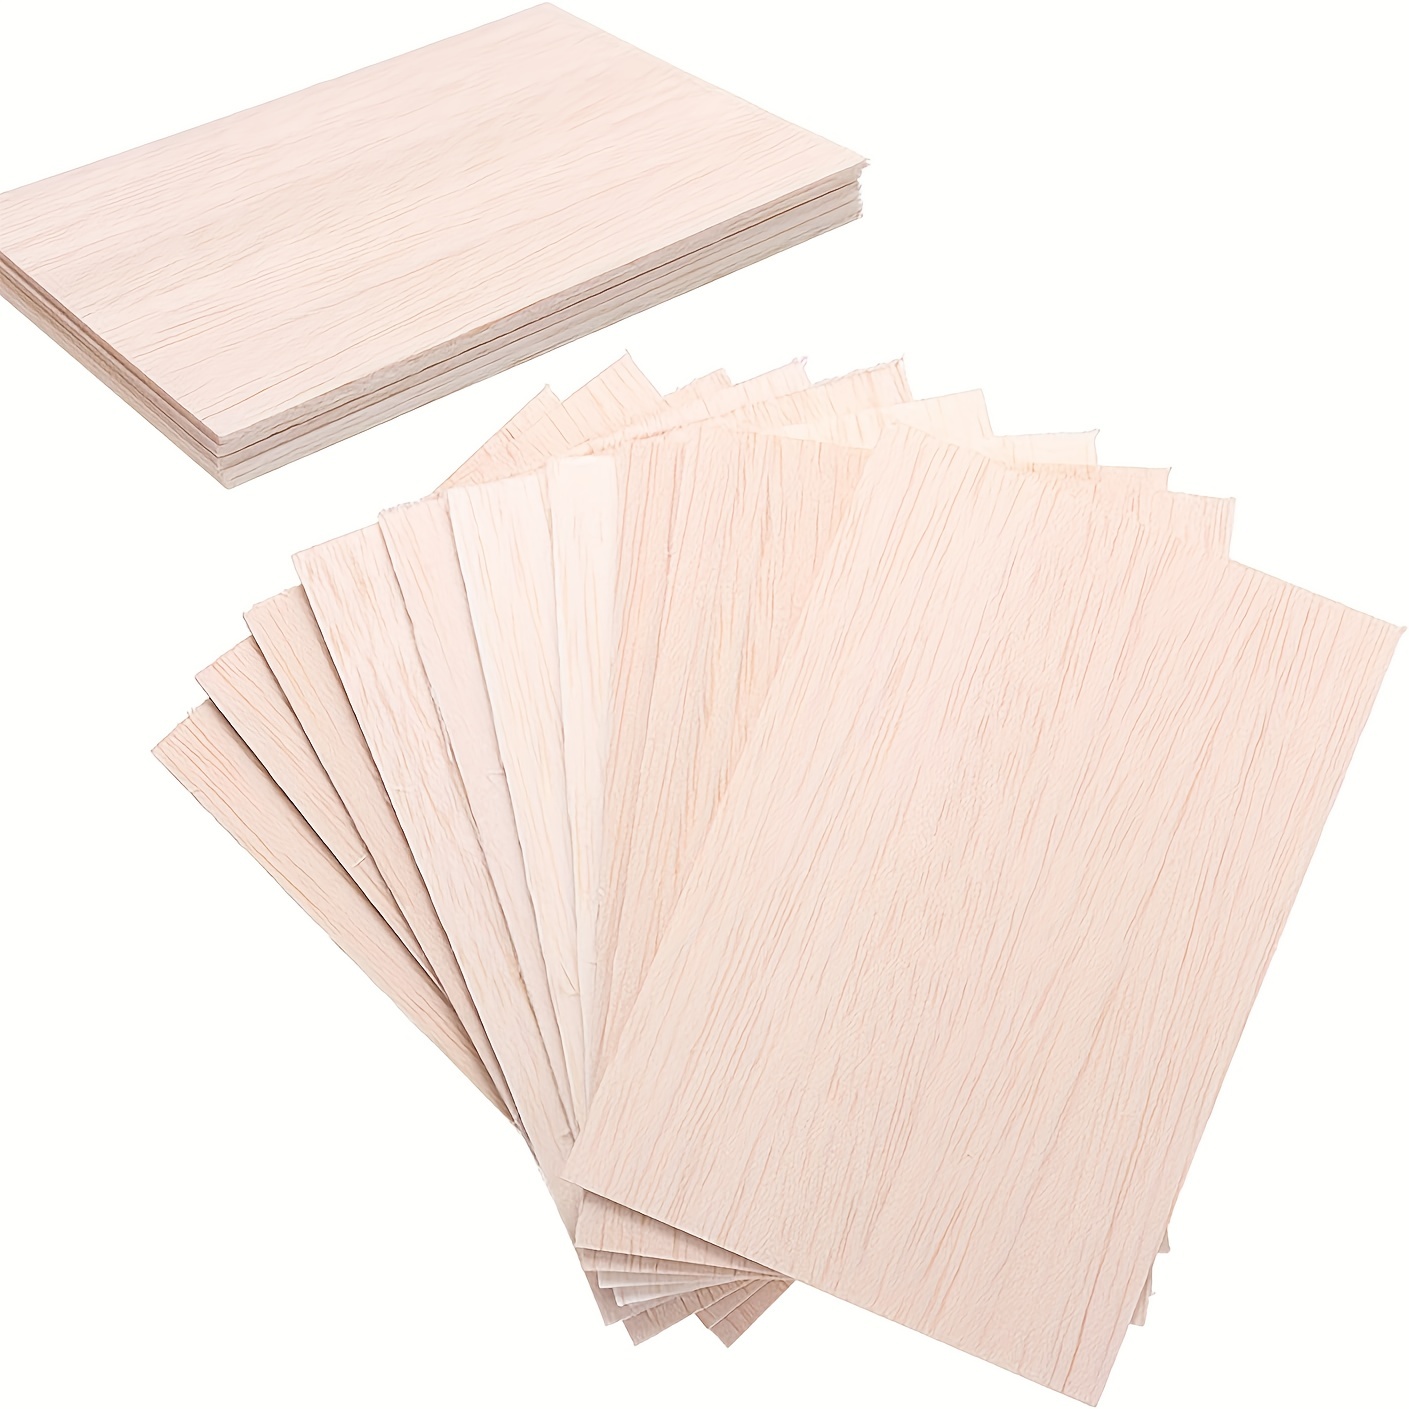 8pcs Wood,Wood Sheets For Crafts, Craft Wood Board For House Aircraft Ship  Boat Arts And Crafts, School Projects, Wooden DIY Ornaments 30x20x0.2cm(12